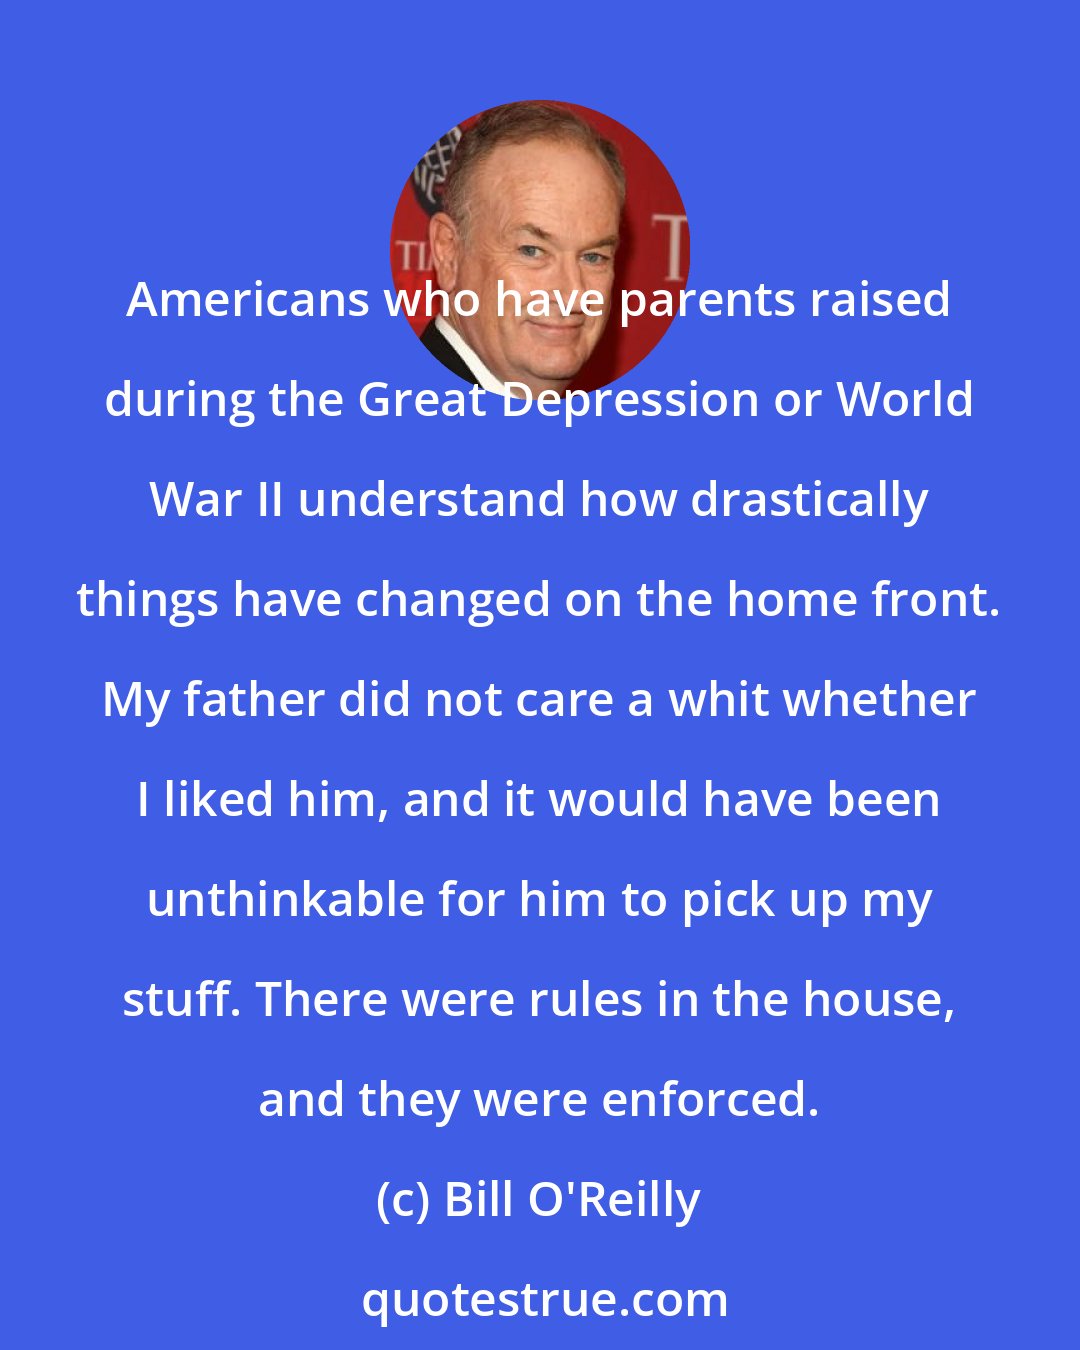 Bill O'Reilly: Americans who have parents raised during the Great Depression or World War II understand how drastically things have changed on the home front. My father did not care a whit whether I liked him, and it would have been unthinkable for him to pick up my stuff. There were rules in the house, and they were enforced.